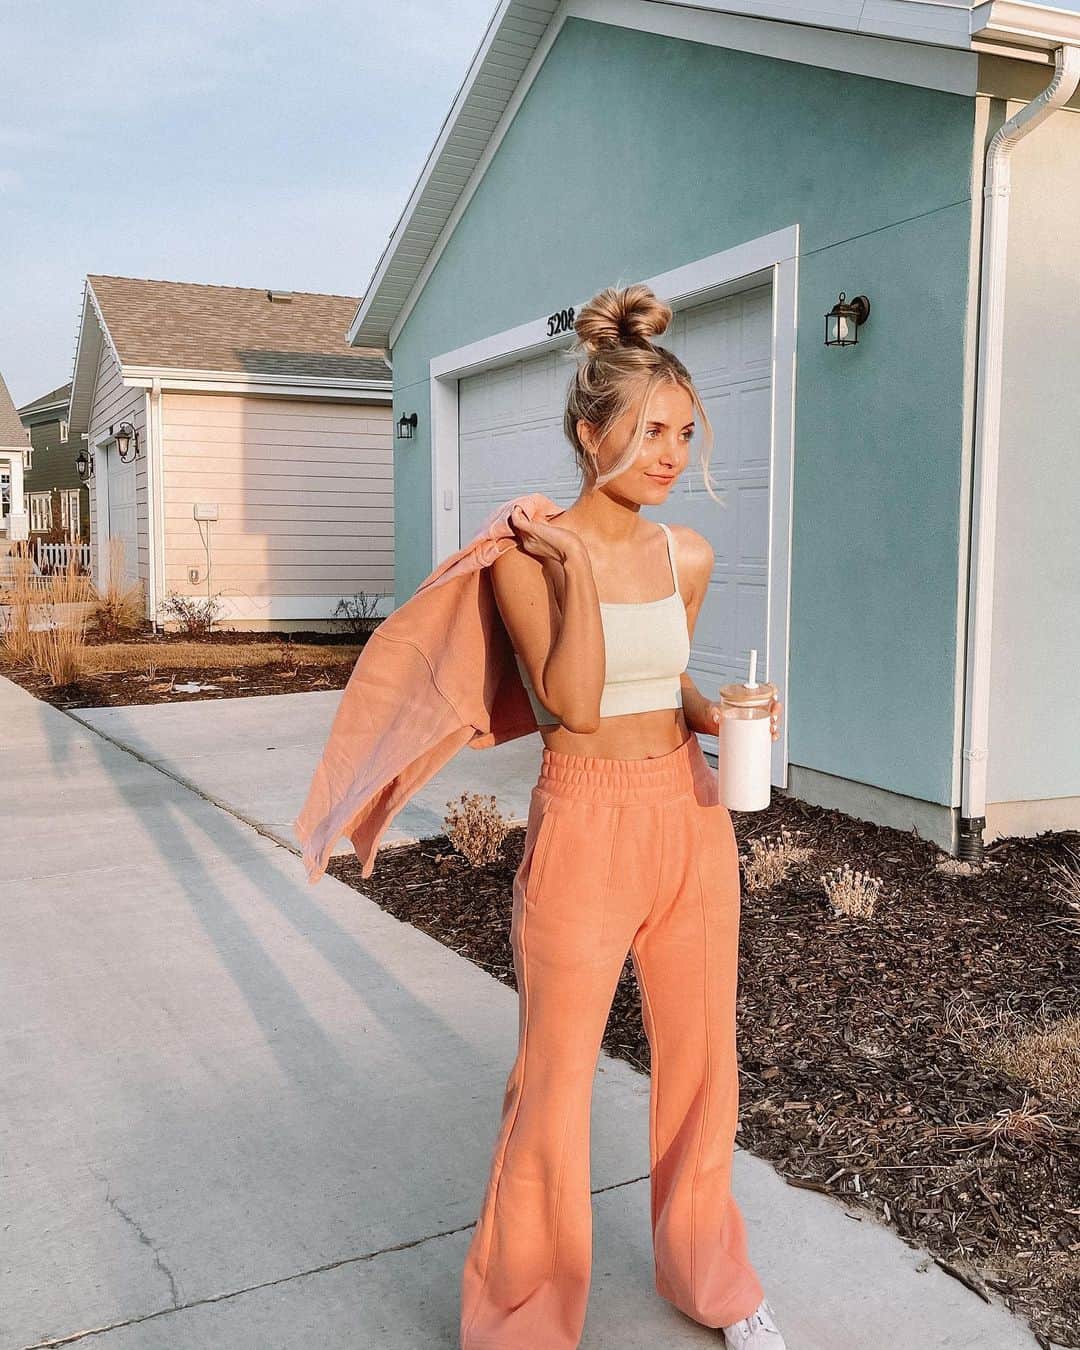 Aspyn Ovard Ferrisのインスタグラム：「GIVEAWAY CLOSED! Winners - @delaney_marie1902 @emilee.goss @briawhnah 💕 New year new @fabletics outfit! Teaming up with them to give away a years worth of leggings to 3 winners! 💕 #fableticsambassador   To enter:  1. Follow @Fabletics & @aspynovard 2. Like this post and tag up to 3 friends in the comments!   💕 Good luck!   US only – ends at 11:59 pm PST on 1/16/2021. No purchase necessary. Not sponsored by Instagram. Prize value is $ 1,000 for each winner. Three winners will be DMed by the official @Fabletics account ONLY by 1/26/2021. Winner will NOT be required to visit other sites to claim prize. See full terms: http://bit.ly/3nElwZP」